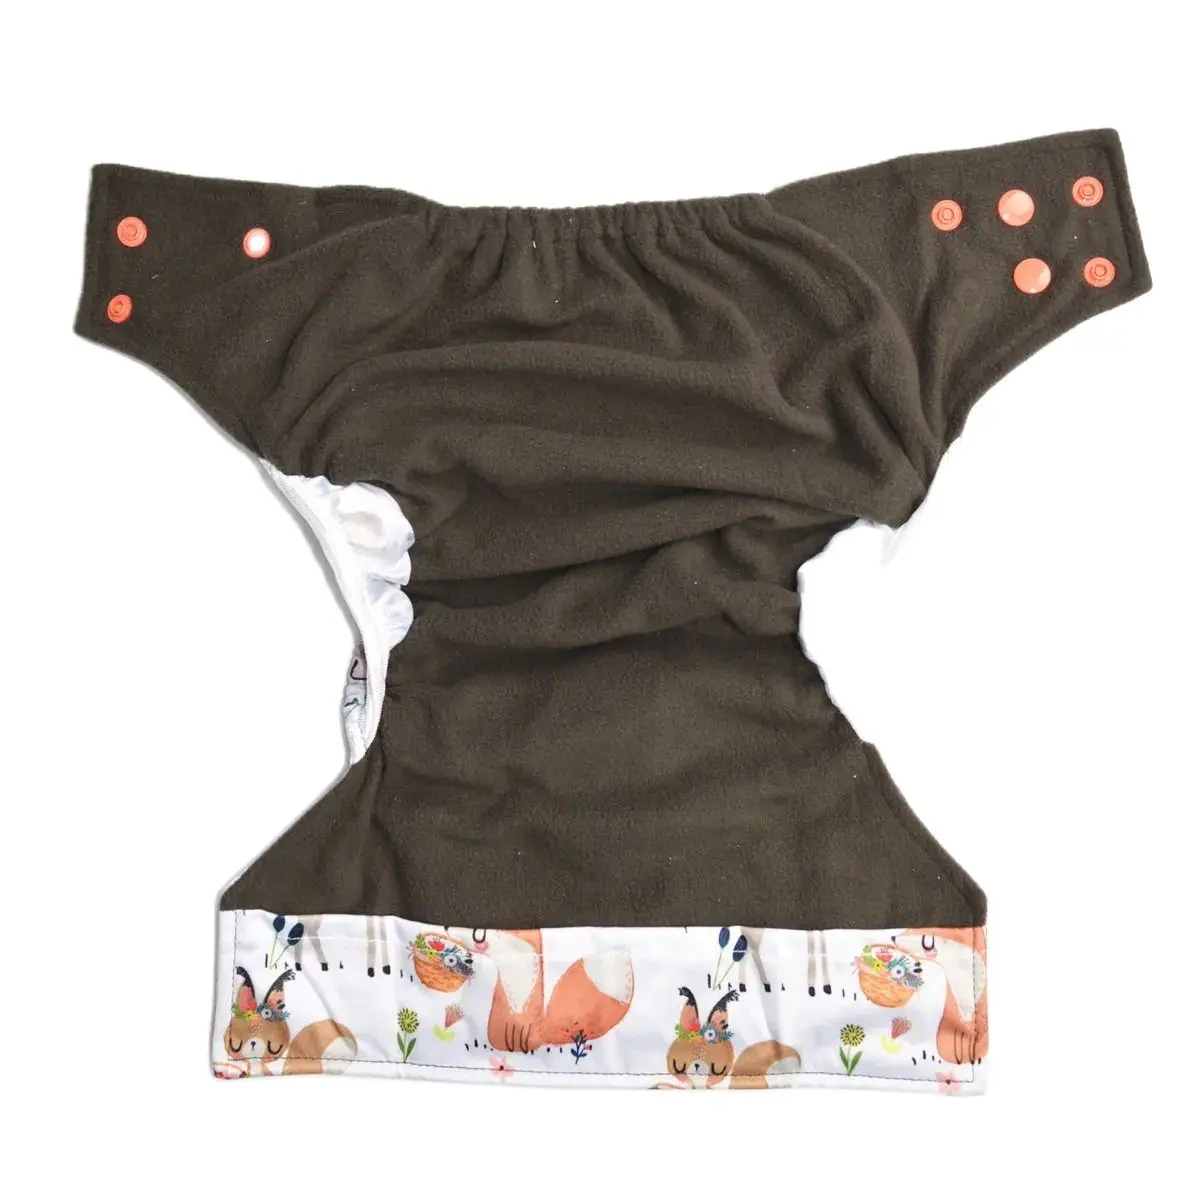 [Sigzagor] 1 Charcoal Bamboo Baby Cloth Diaper Nappy Washable Reusable Double Gusset 3-15kg 8-36lbs NO INSERT